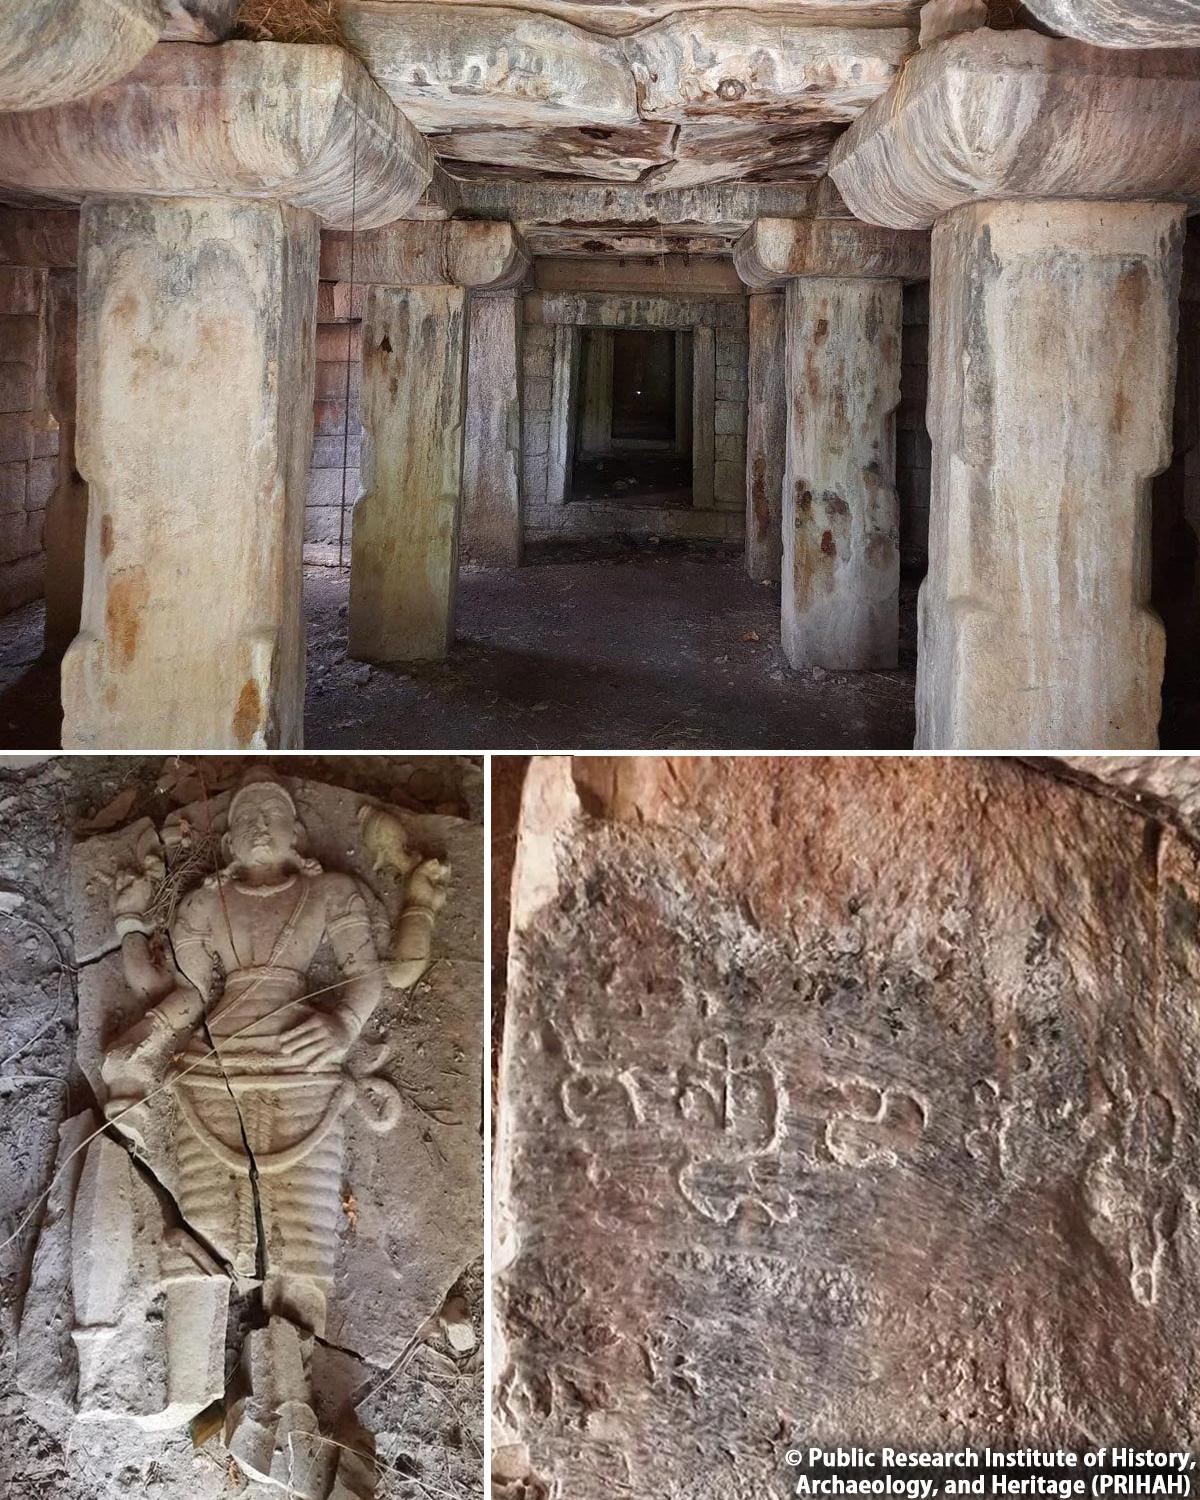 1,300-year-old temples from the Badami Chalukyan era discovered in India